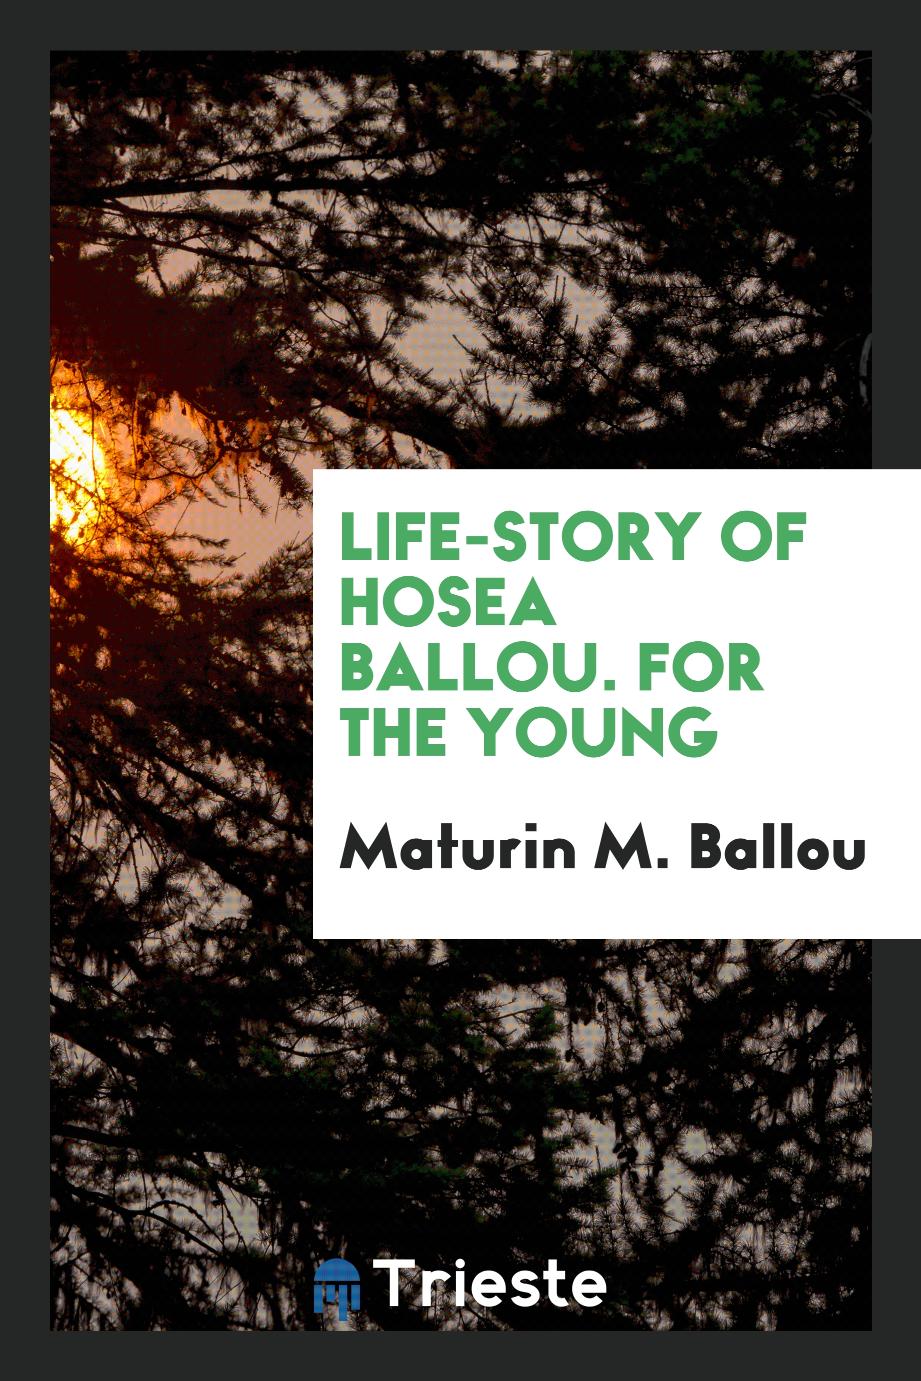 Life-Story of Hosea Ballou. For the Young